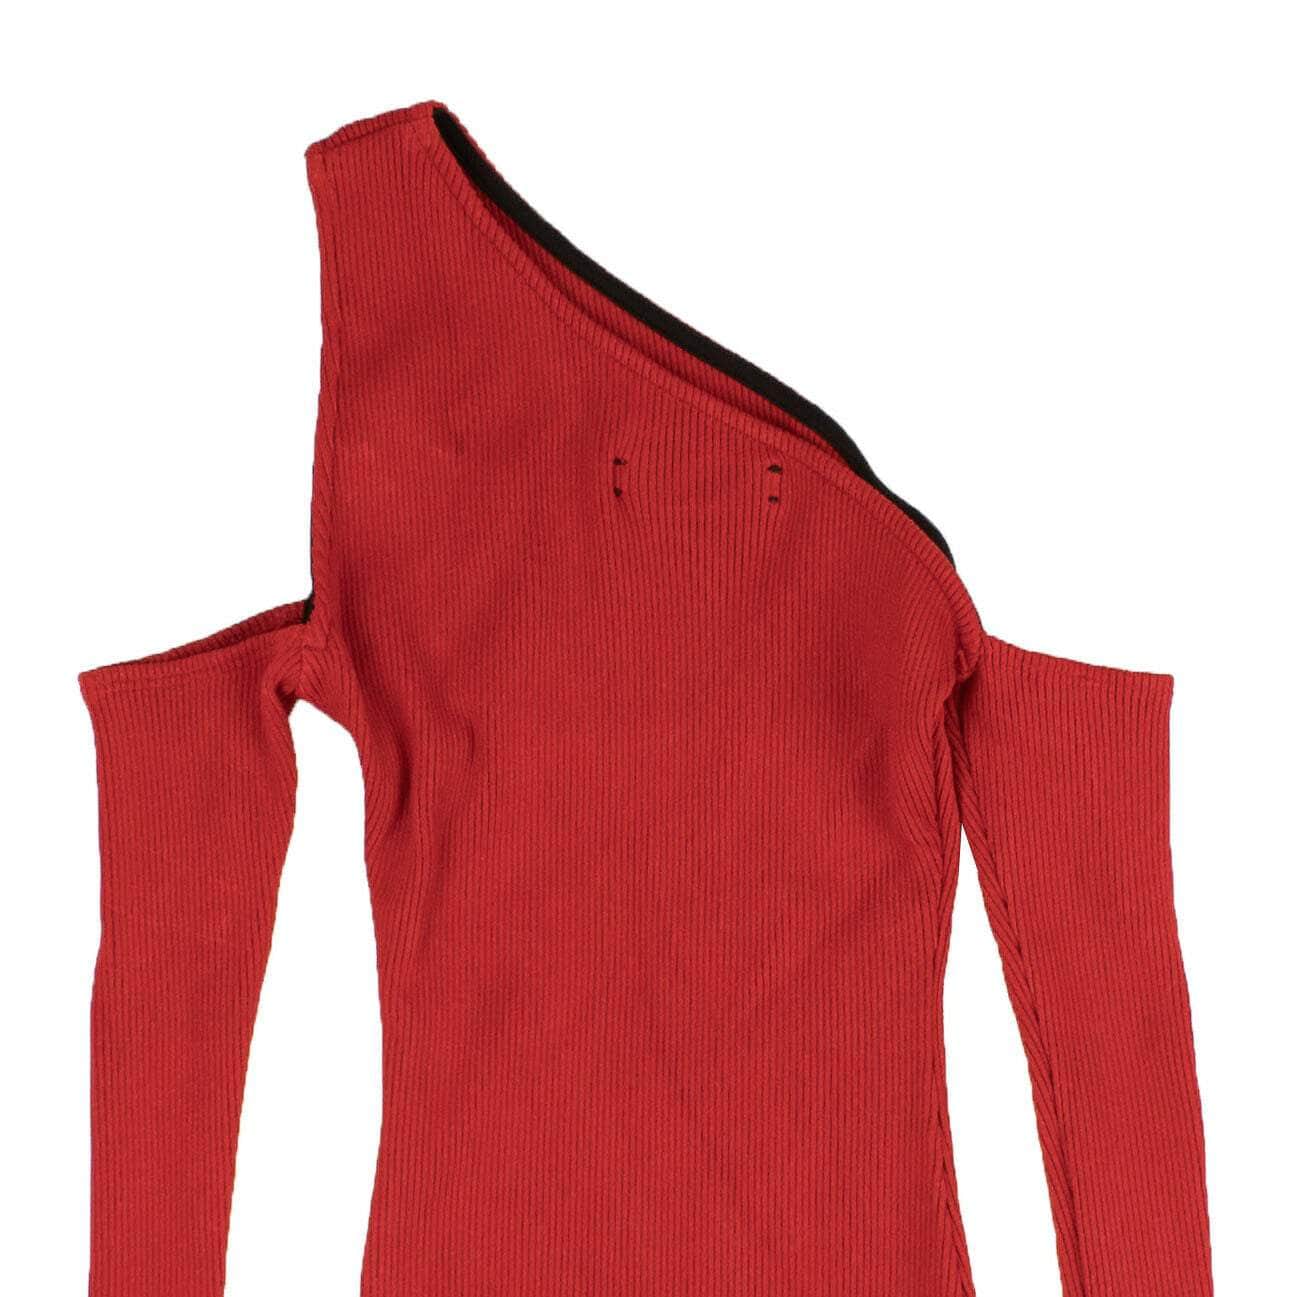 Amiri 500-750, amiri, channelenable-all, chicmi, couponcollection, gender-womens, main-clothing, size-0-us, womens-cocktail-dresses 0 US Red Knit Off Shoulder Mini Dress 73A-AMR-0001/0 73A-AMR-0001/0